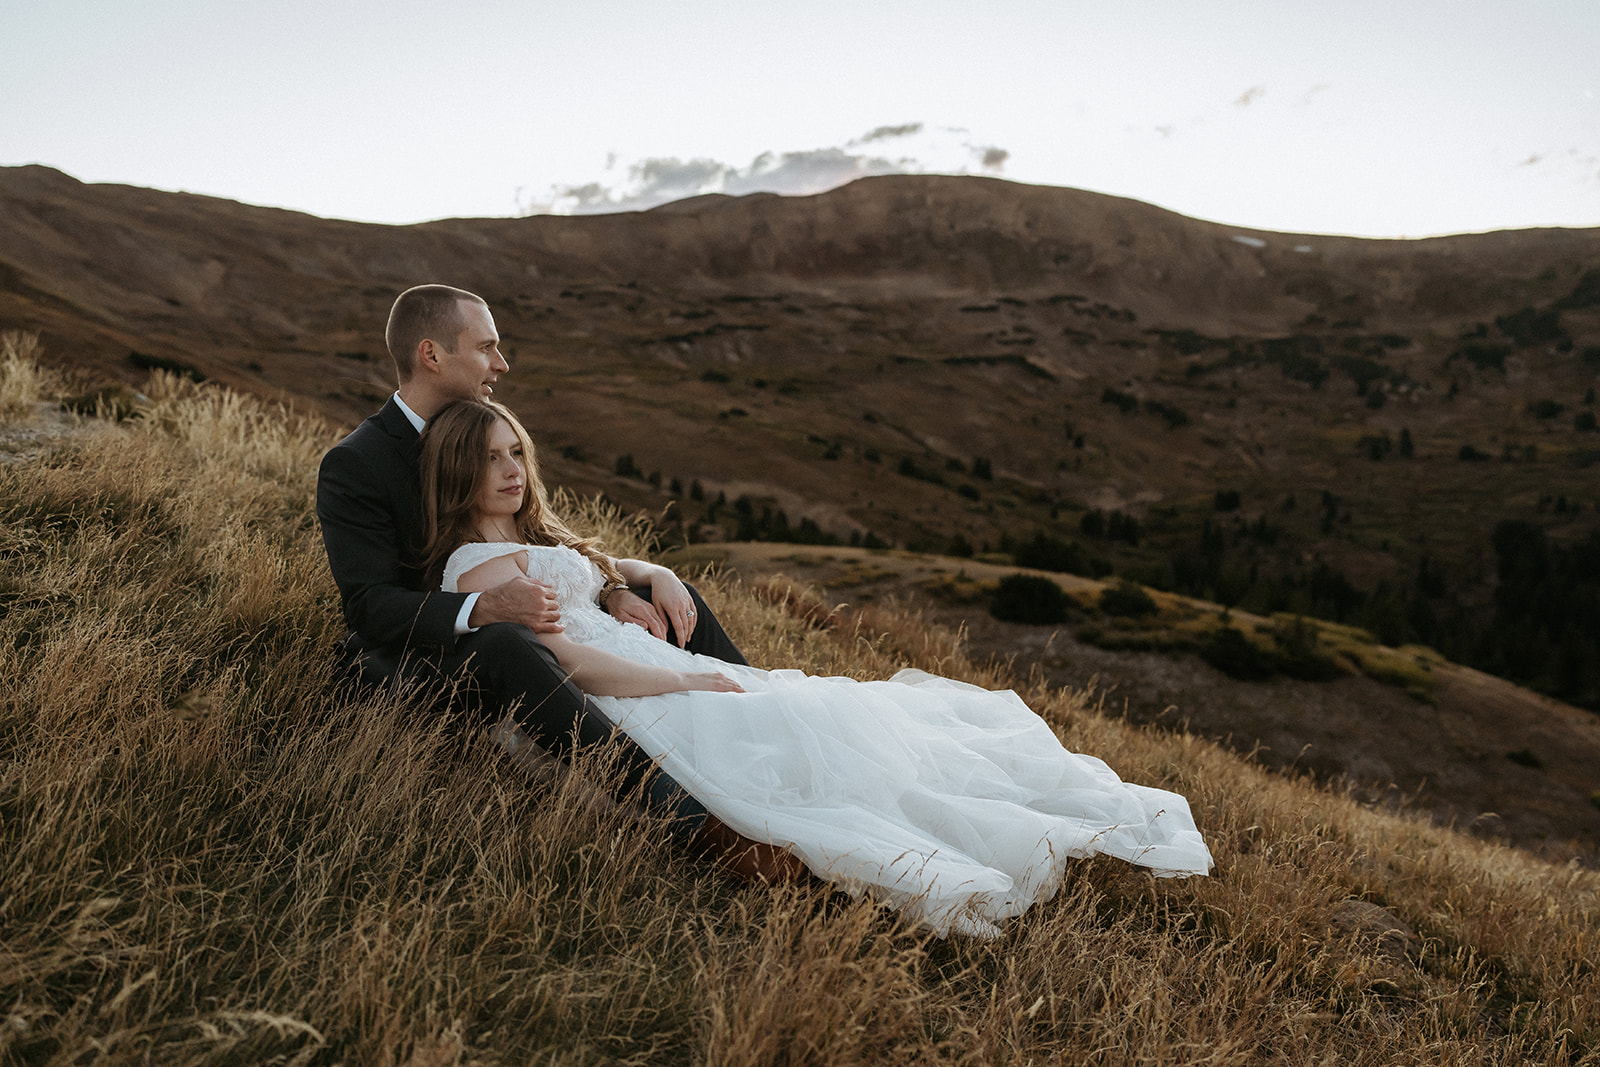 A bride lays in the lap of her husband on a steep hillside at sunset